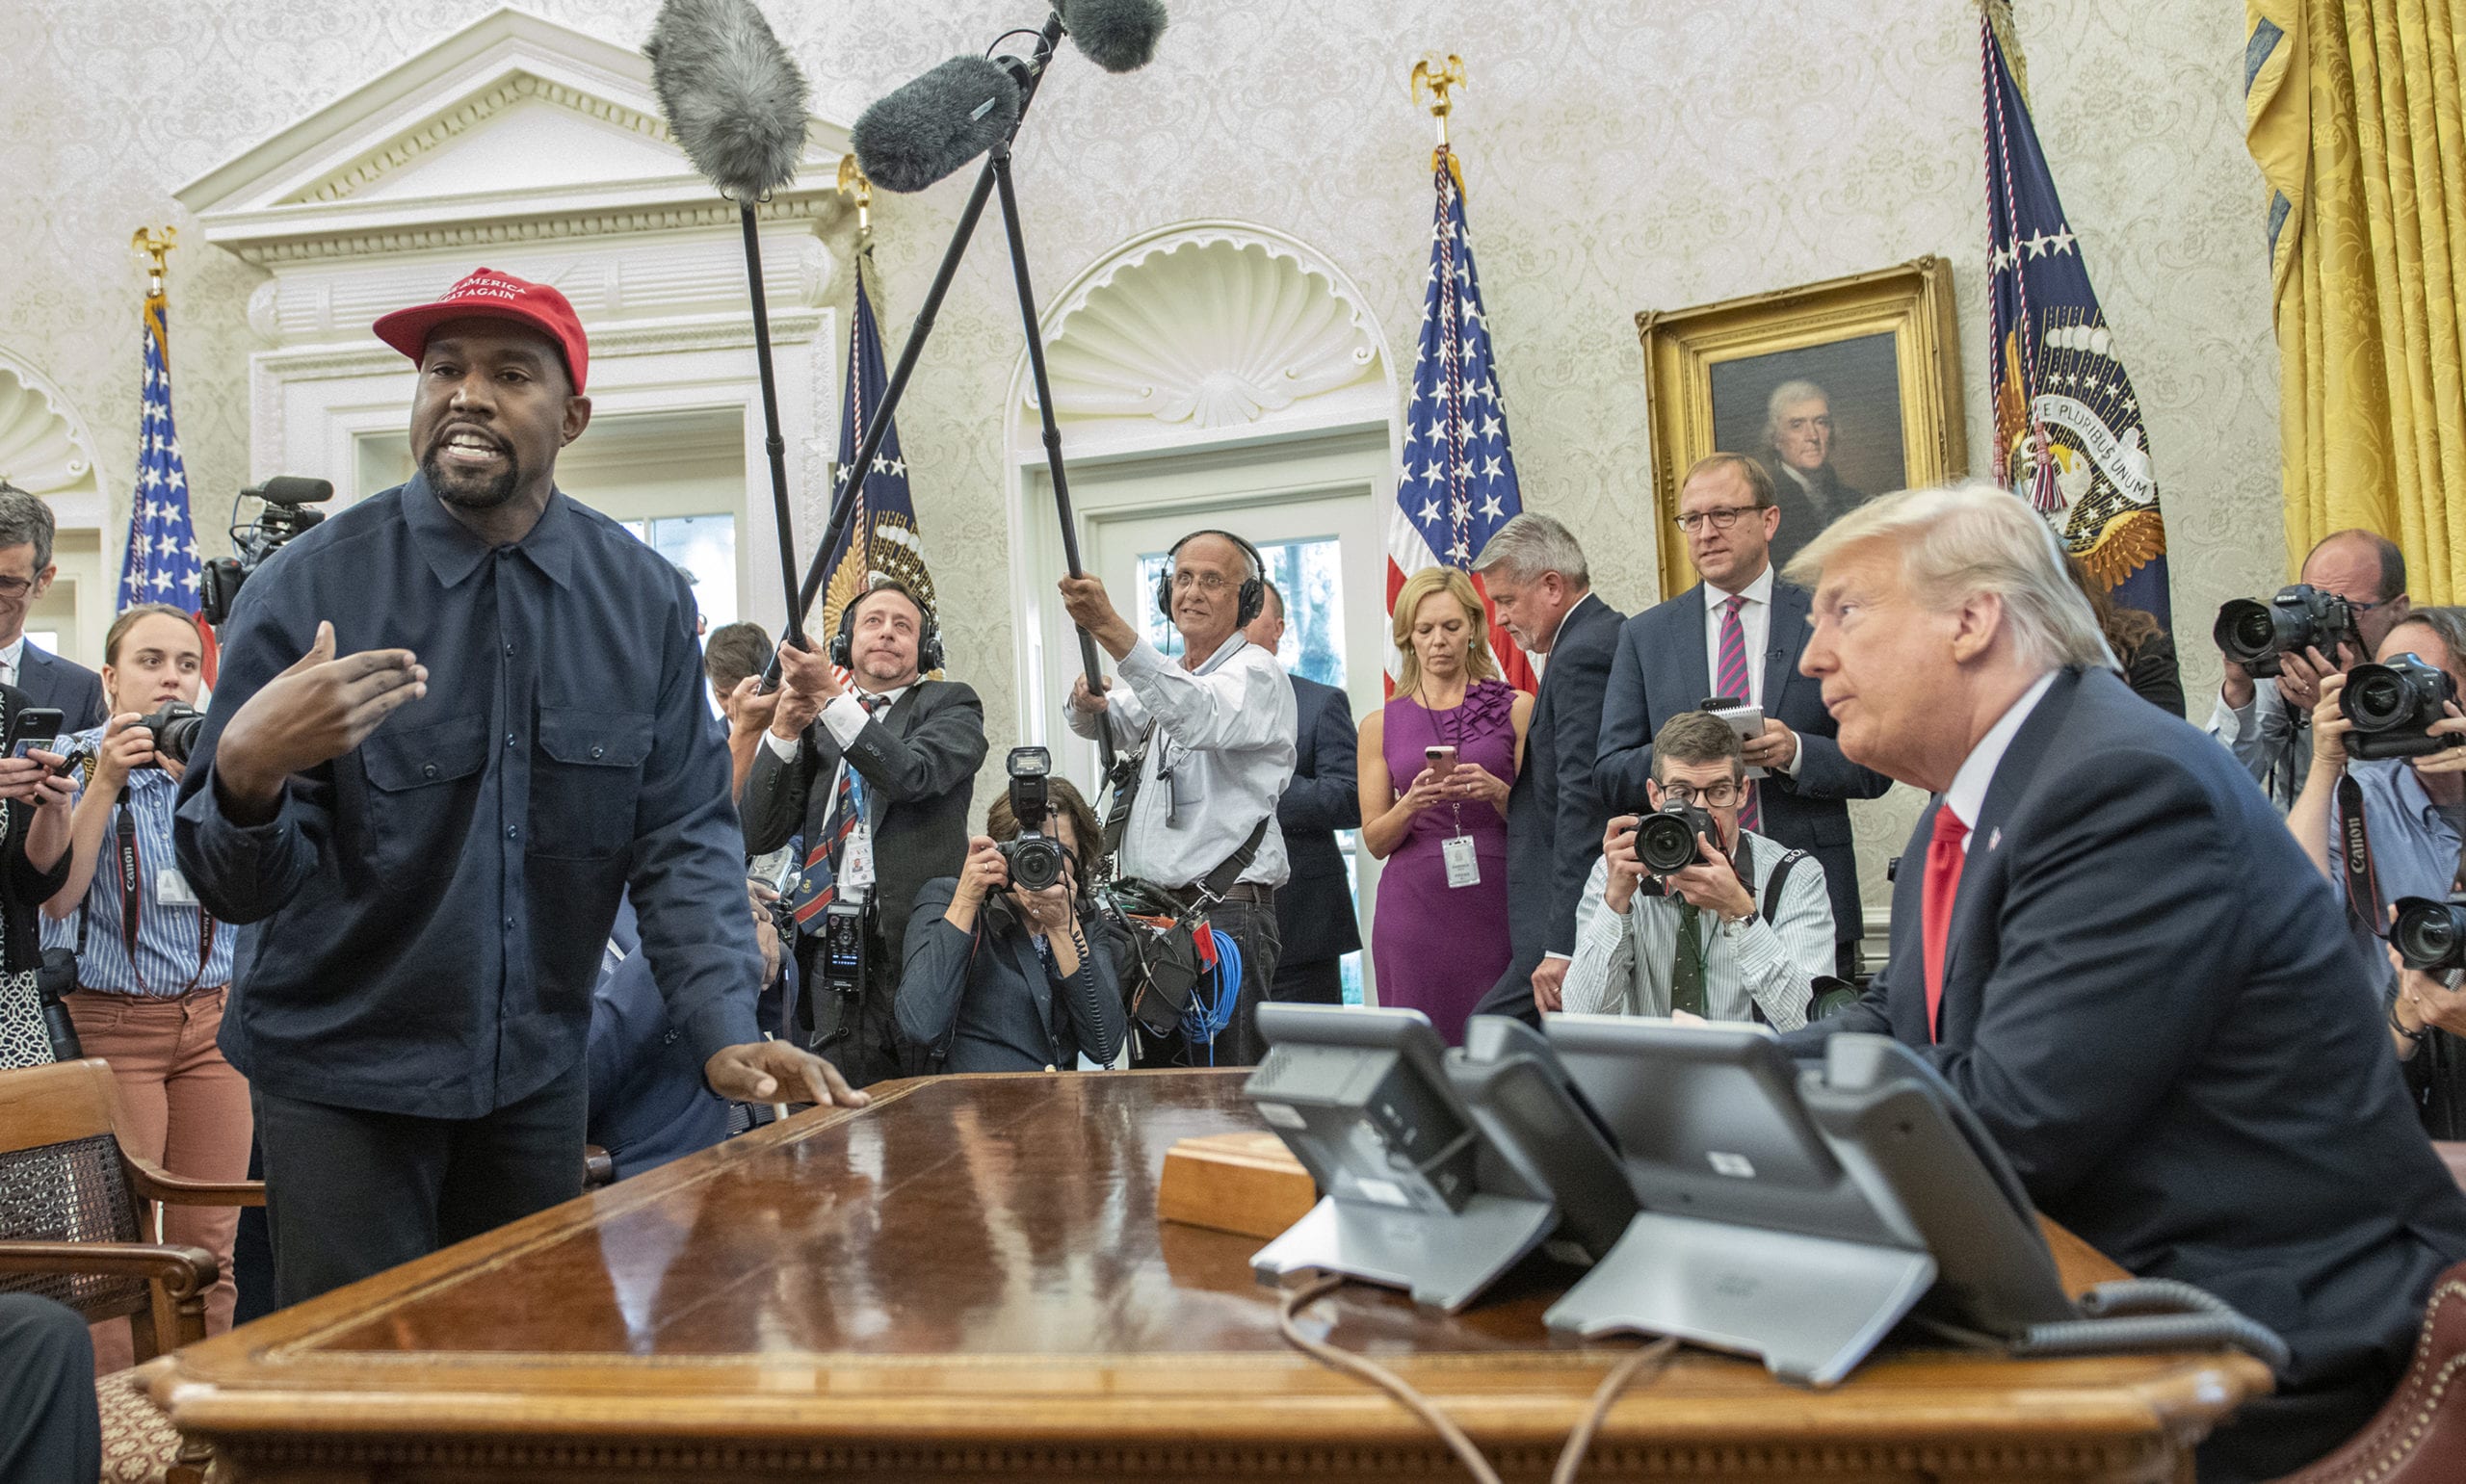 Surrounded by members of the press and others, Kanye West stands as he talks with US President Donald Trump in the White House's Oval Office, Washington DC, October 11, 2018.(Photo by Ron Sachs/Consolidated News Pictures/Getty Images)